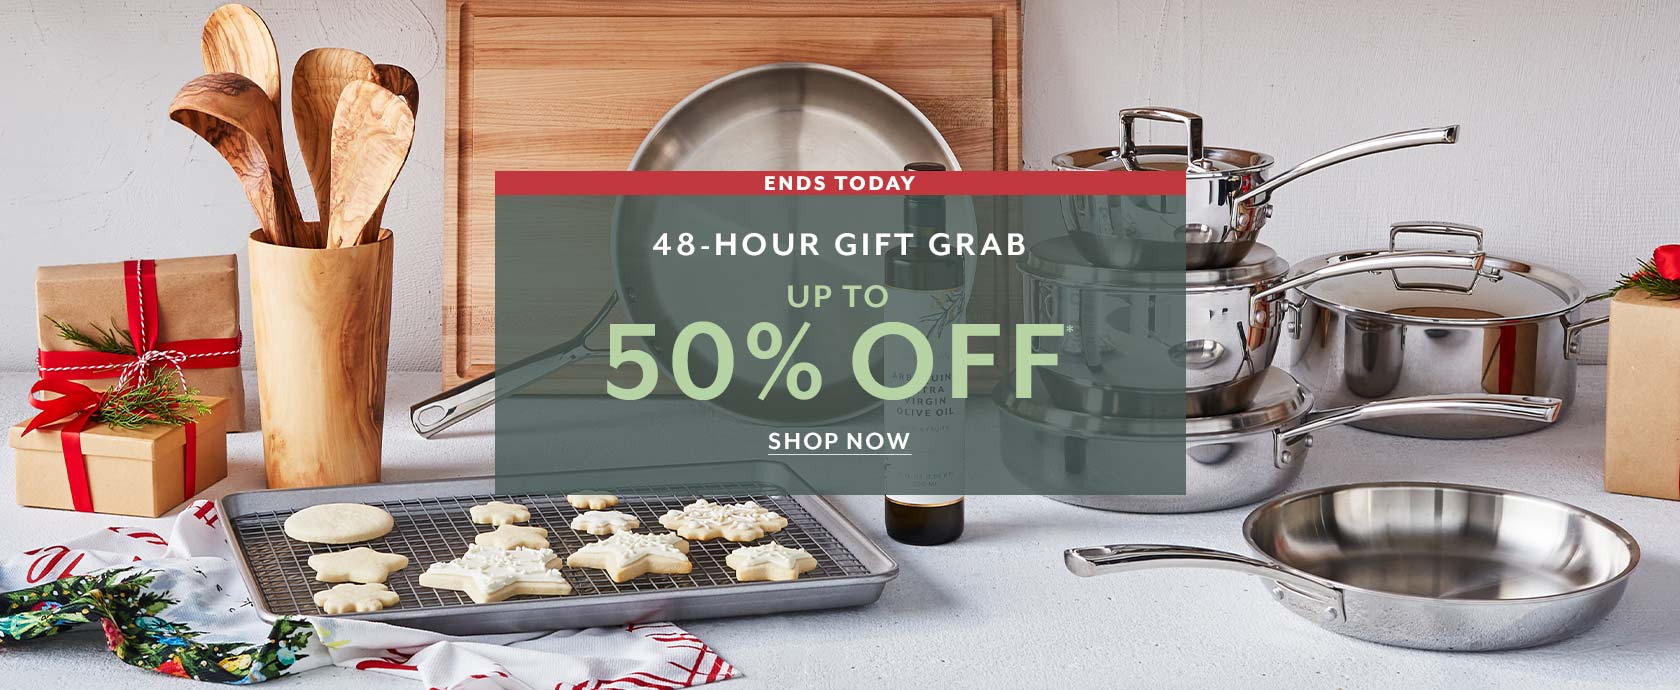 Ends today 48-hour gift grab up to 50% off, shop now.